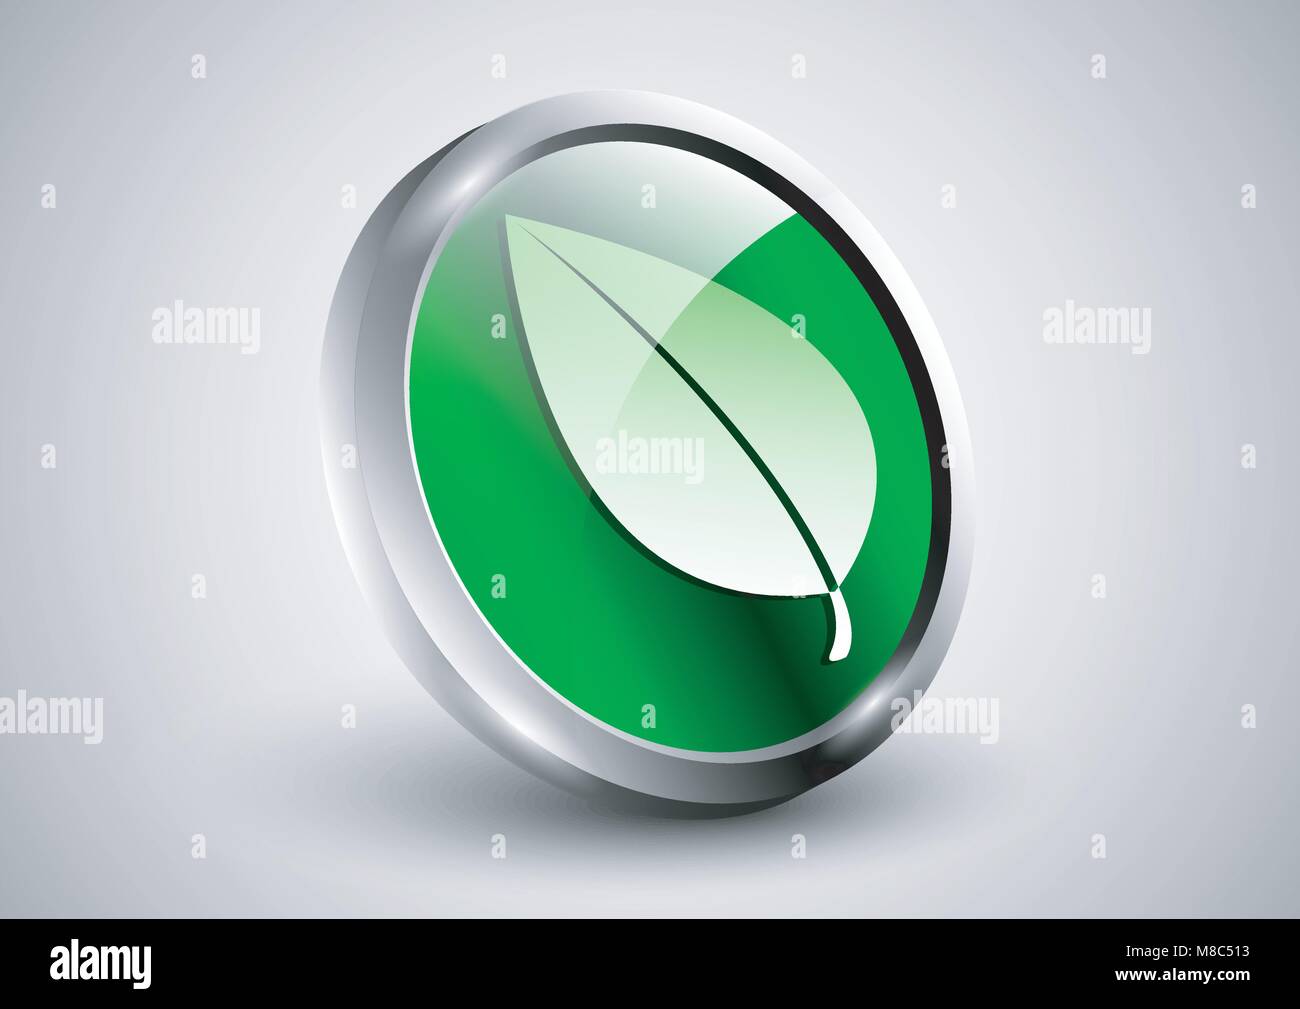 design vector of coin realistic object with symbol Stock Vector